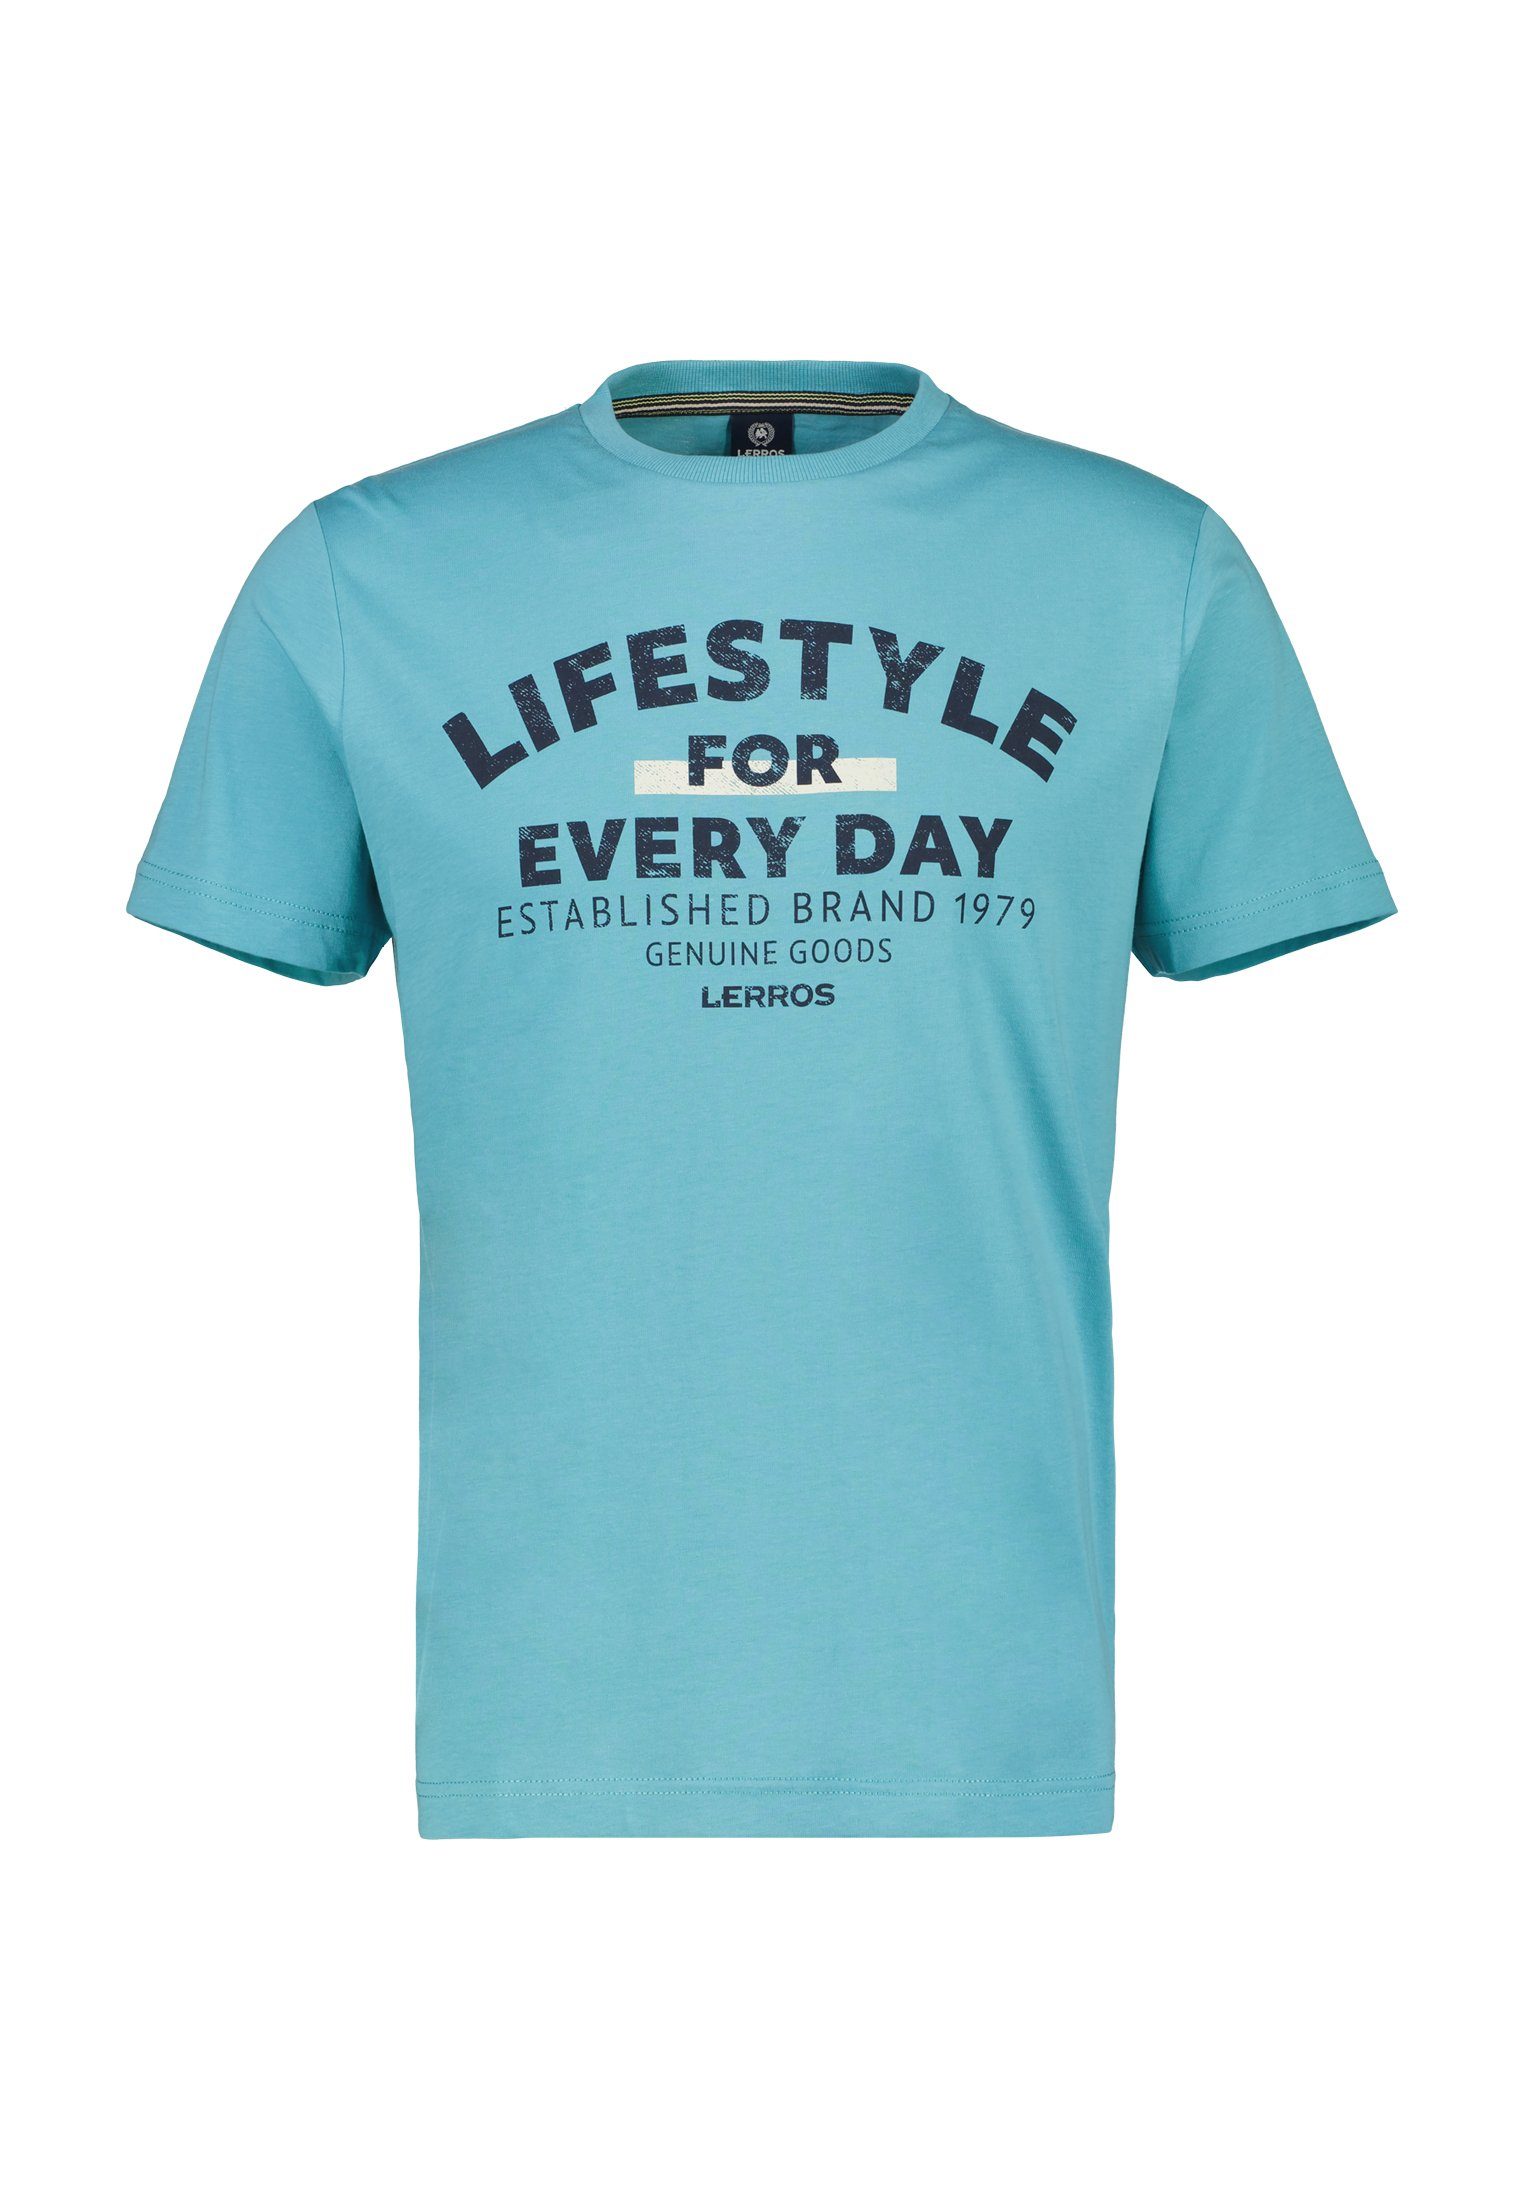 day* T-Shirt BLUE T-Shirt SKY LERROS *Lifestyle LERROS for every